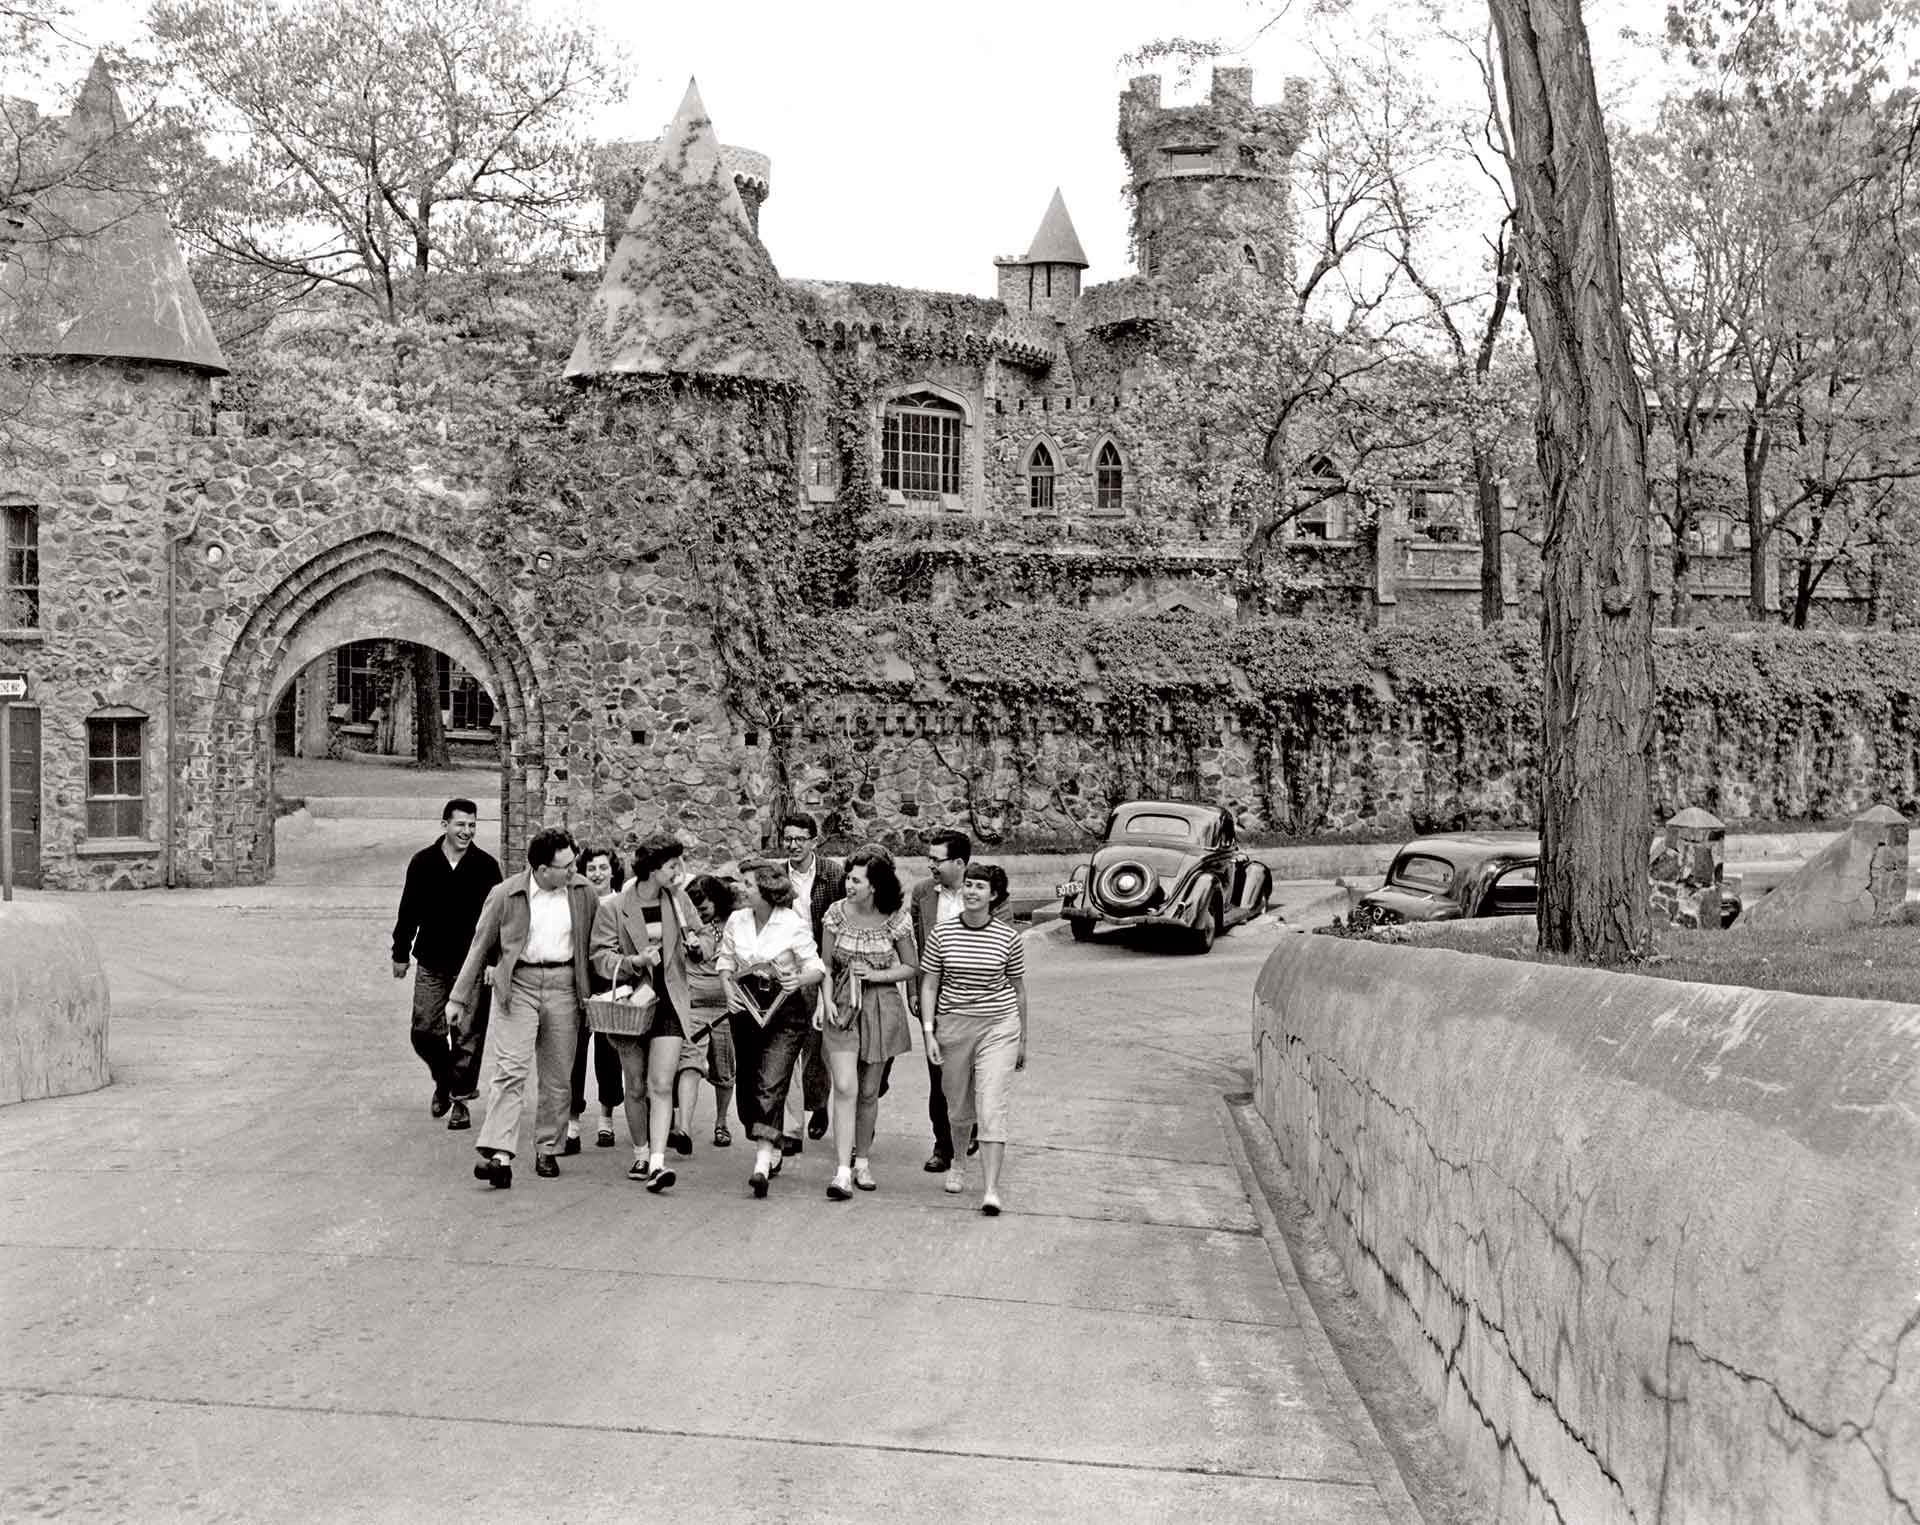 Students walk in front of the Brandeis castle